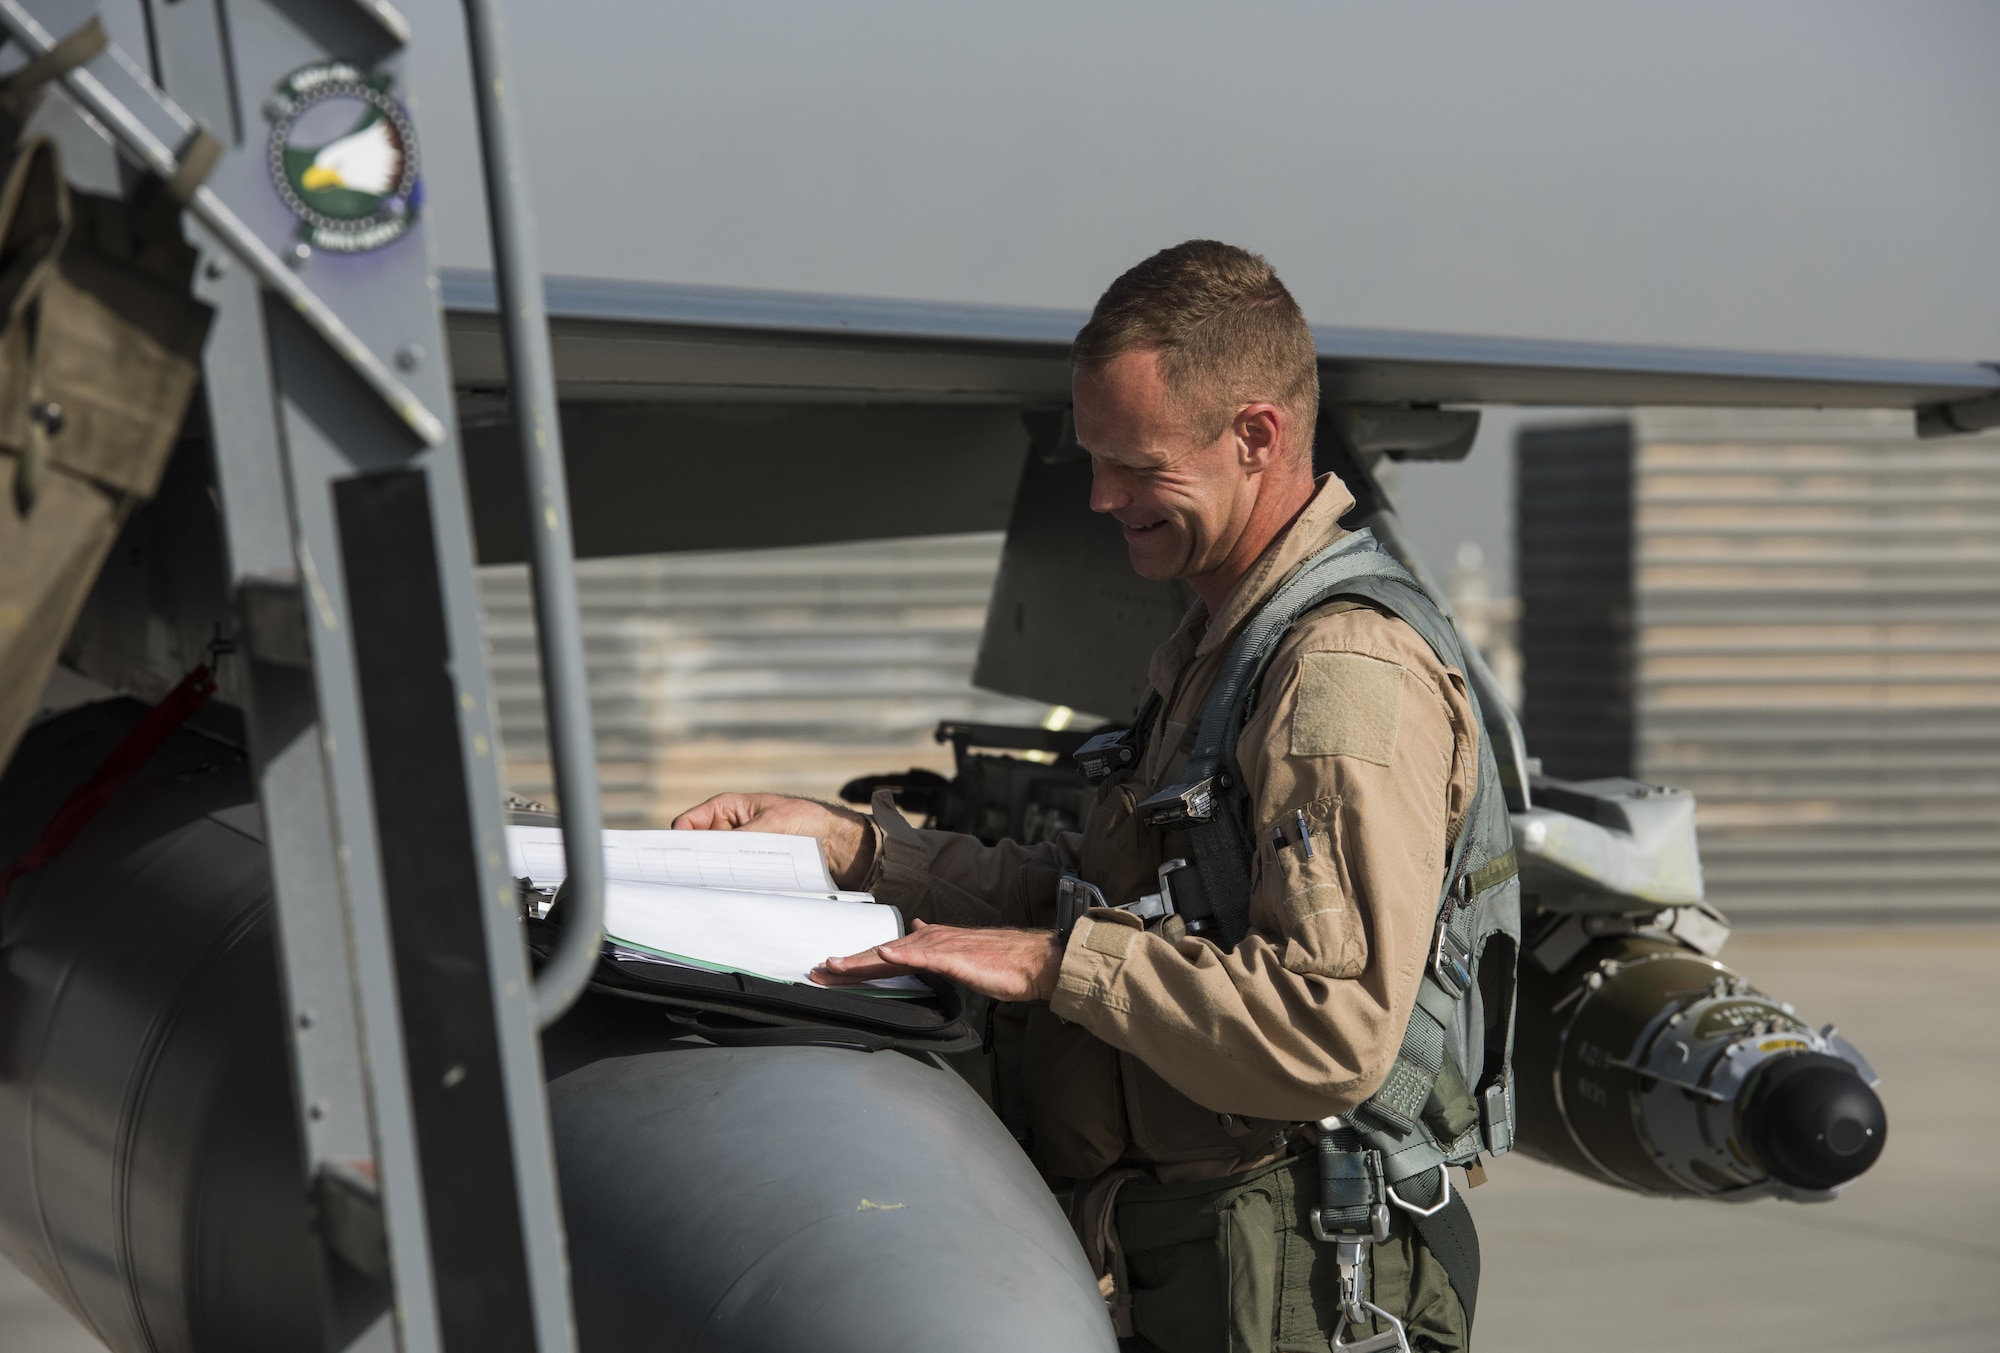 Brig. Gen. Jim Sears, commander of the 455th Air Expeditionary Wing, conducts pre-flight checks prior to his fini flight at Bagram Airfield, Afghanistan, May 22, 2017. The fini flight is a time-honored military aviation tradition marking the last flight of a commander's tour. (U.S. Air Force photo by Staff Sgt. Benjamin Gonsier)